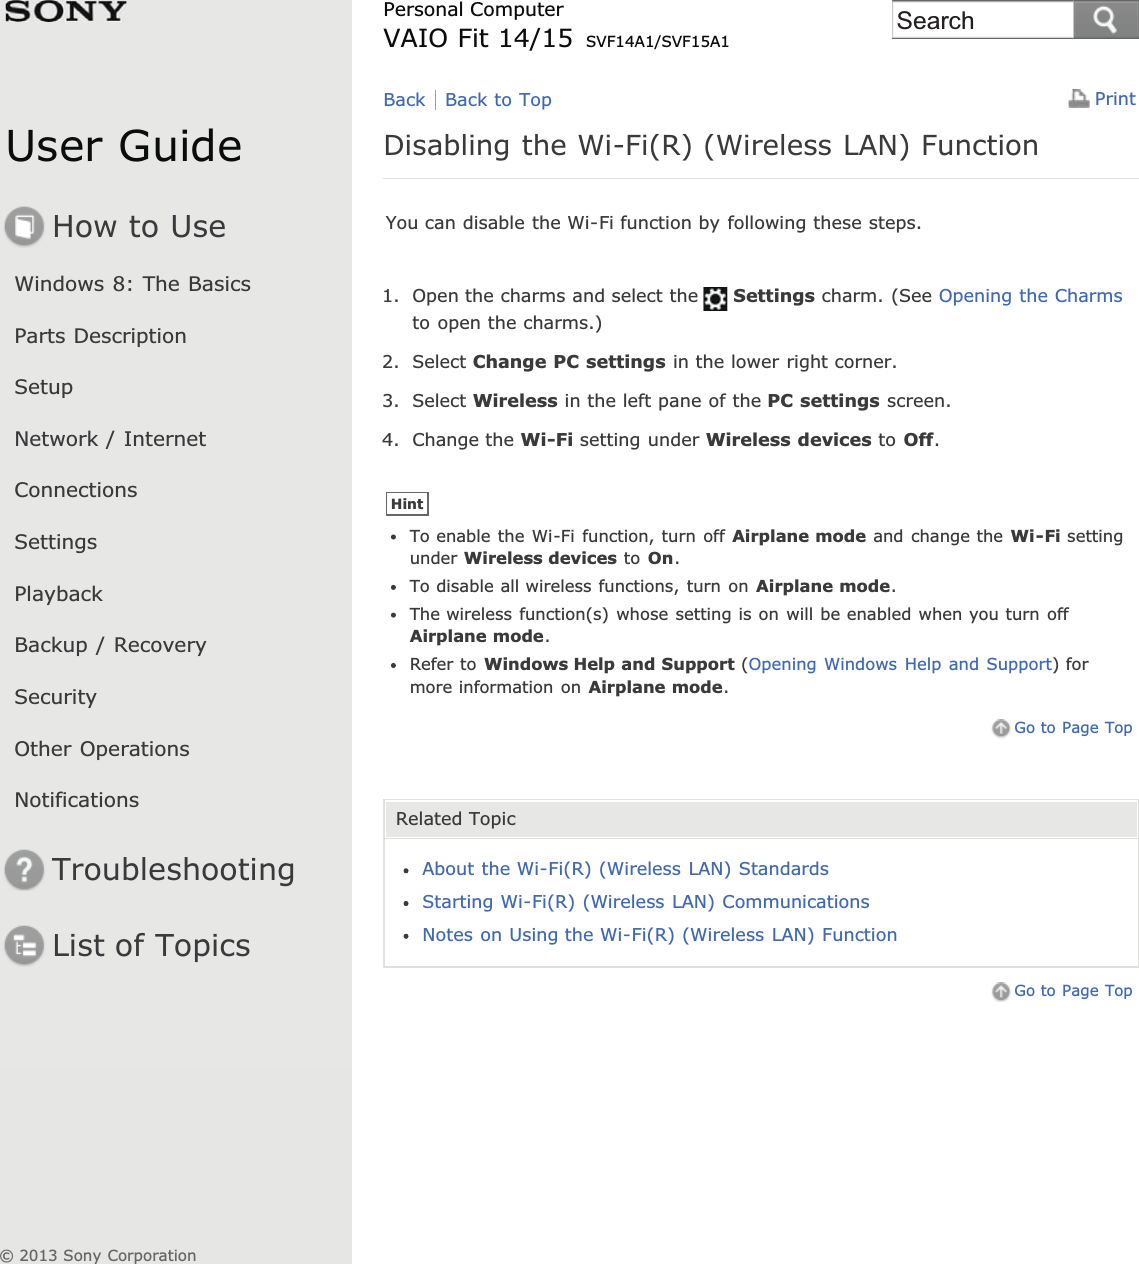 User GuideHow to UseWindows 8: The BasicsParts DescriptionSetupNetwork / InternetConnectionsSettingsPlaybackBackup / RecoverySecurityOther OperationsNotificationsTroubleshootingList of TopicsPrintPersonal ComputerVAIO Fit 14/15 SVF14A1/SVF15A1Disabling the Wi-Fi(R) (Wireless LAN) FunctionYou can disable the Wi-Fi function by following these steps.1. Open the charms and select the Settings charm. (See Opening the Charmsto open the charms.)2. Select Change PC settings in the lower right corner.3. Select Wireless in the left pane of the PC settings screen.4. Change the Wi-Fi setting under Wireless devices to Off.HintTo enable the Wi-Fi function, turn off Airplane mode and change the Wi-Fi settingunder Wireless devices to On.To disable all wireless functions, turn on Airplane mode.The wireless function(s) whose setting is on will be enabled when you turn offAirplane mode.Refer to Windows Help and Support (Opening Windows Help and Support) formore information on Airplane mode.Go to Page TopRelated TopicAbout the Wi-Fi(R) (Wireless LAN) StandardsStarting Wi-Fi(R) (Wireless LAN) CommunicationsNotes on Using the Wi-Fi(R) (Wireless LAN) FunctionGo to Page TopBack Back to Top© 2013 Sony CorporationSearch